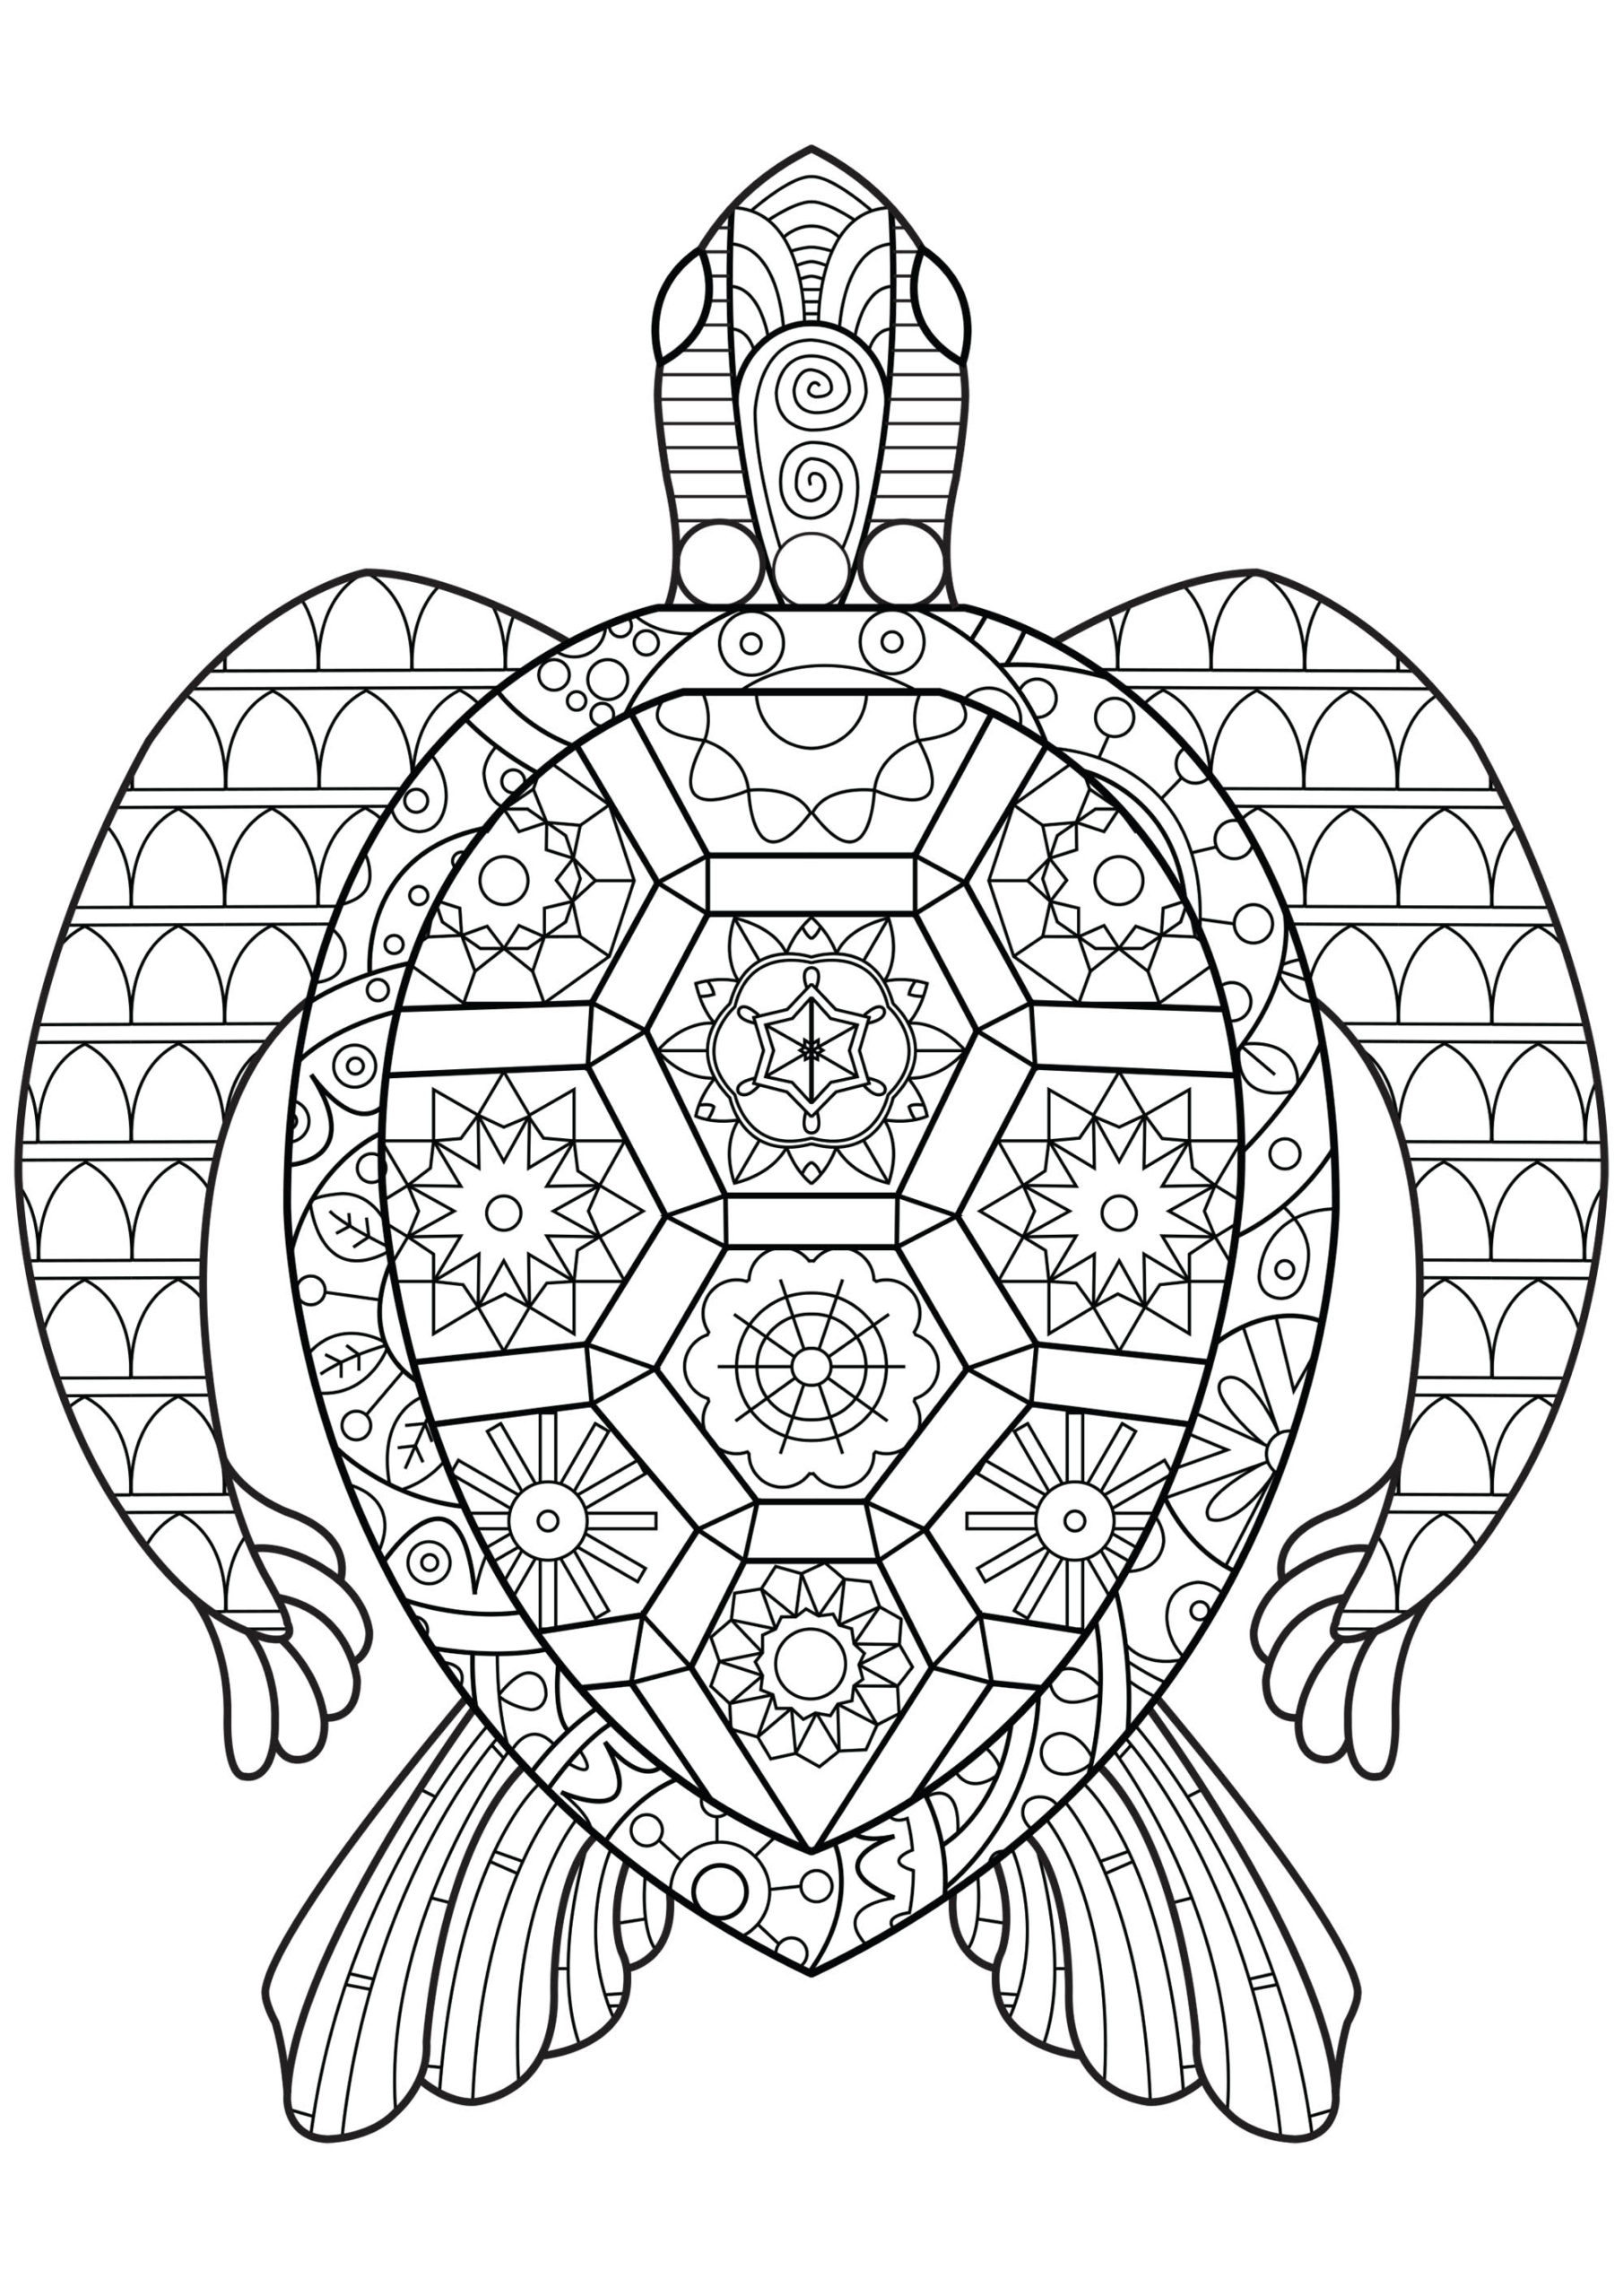 Coloring Pages : Reptile Coloring Best For Kids Iguana Zen Turtle ...